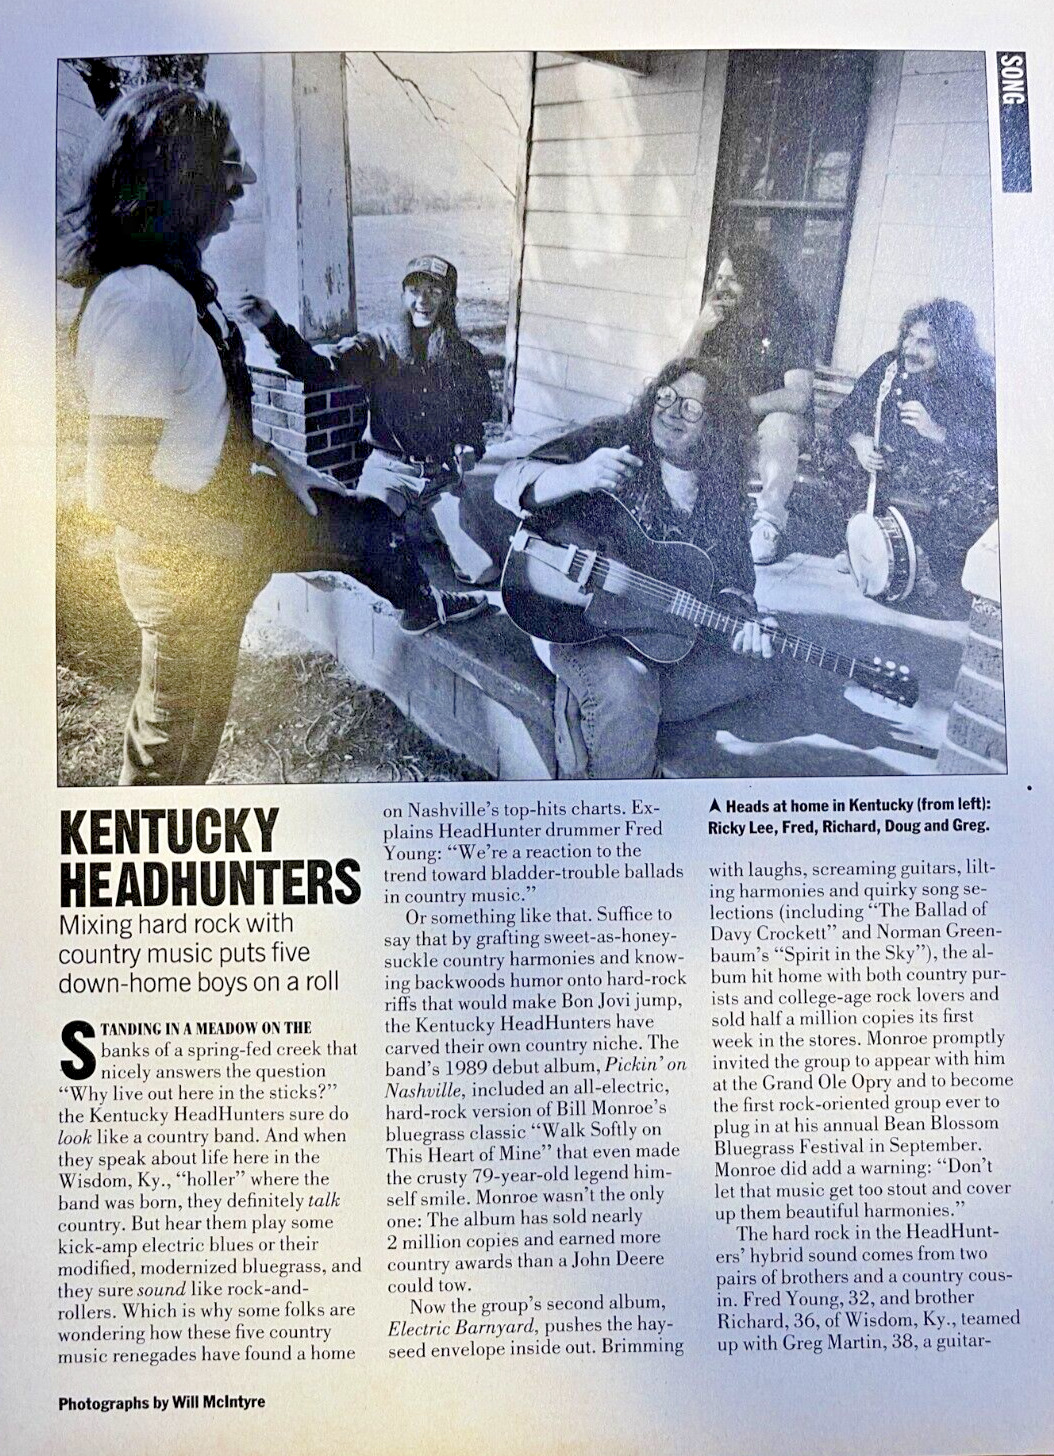 1991 Country Music Group The Kentucky Headhunters